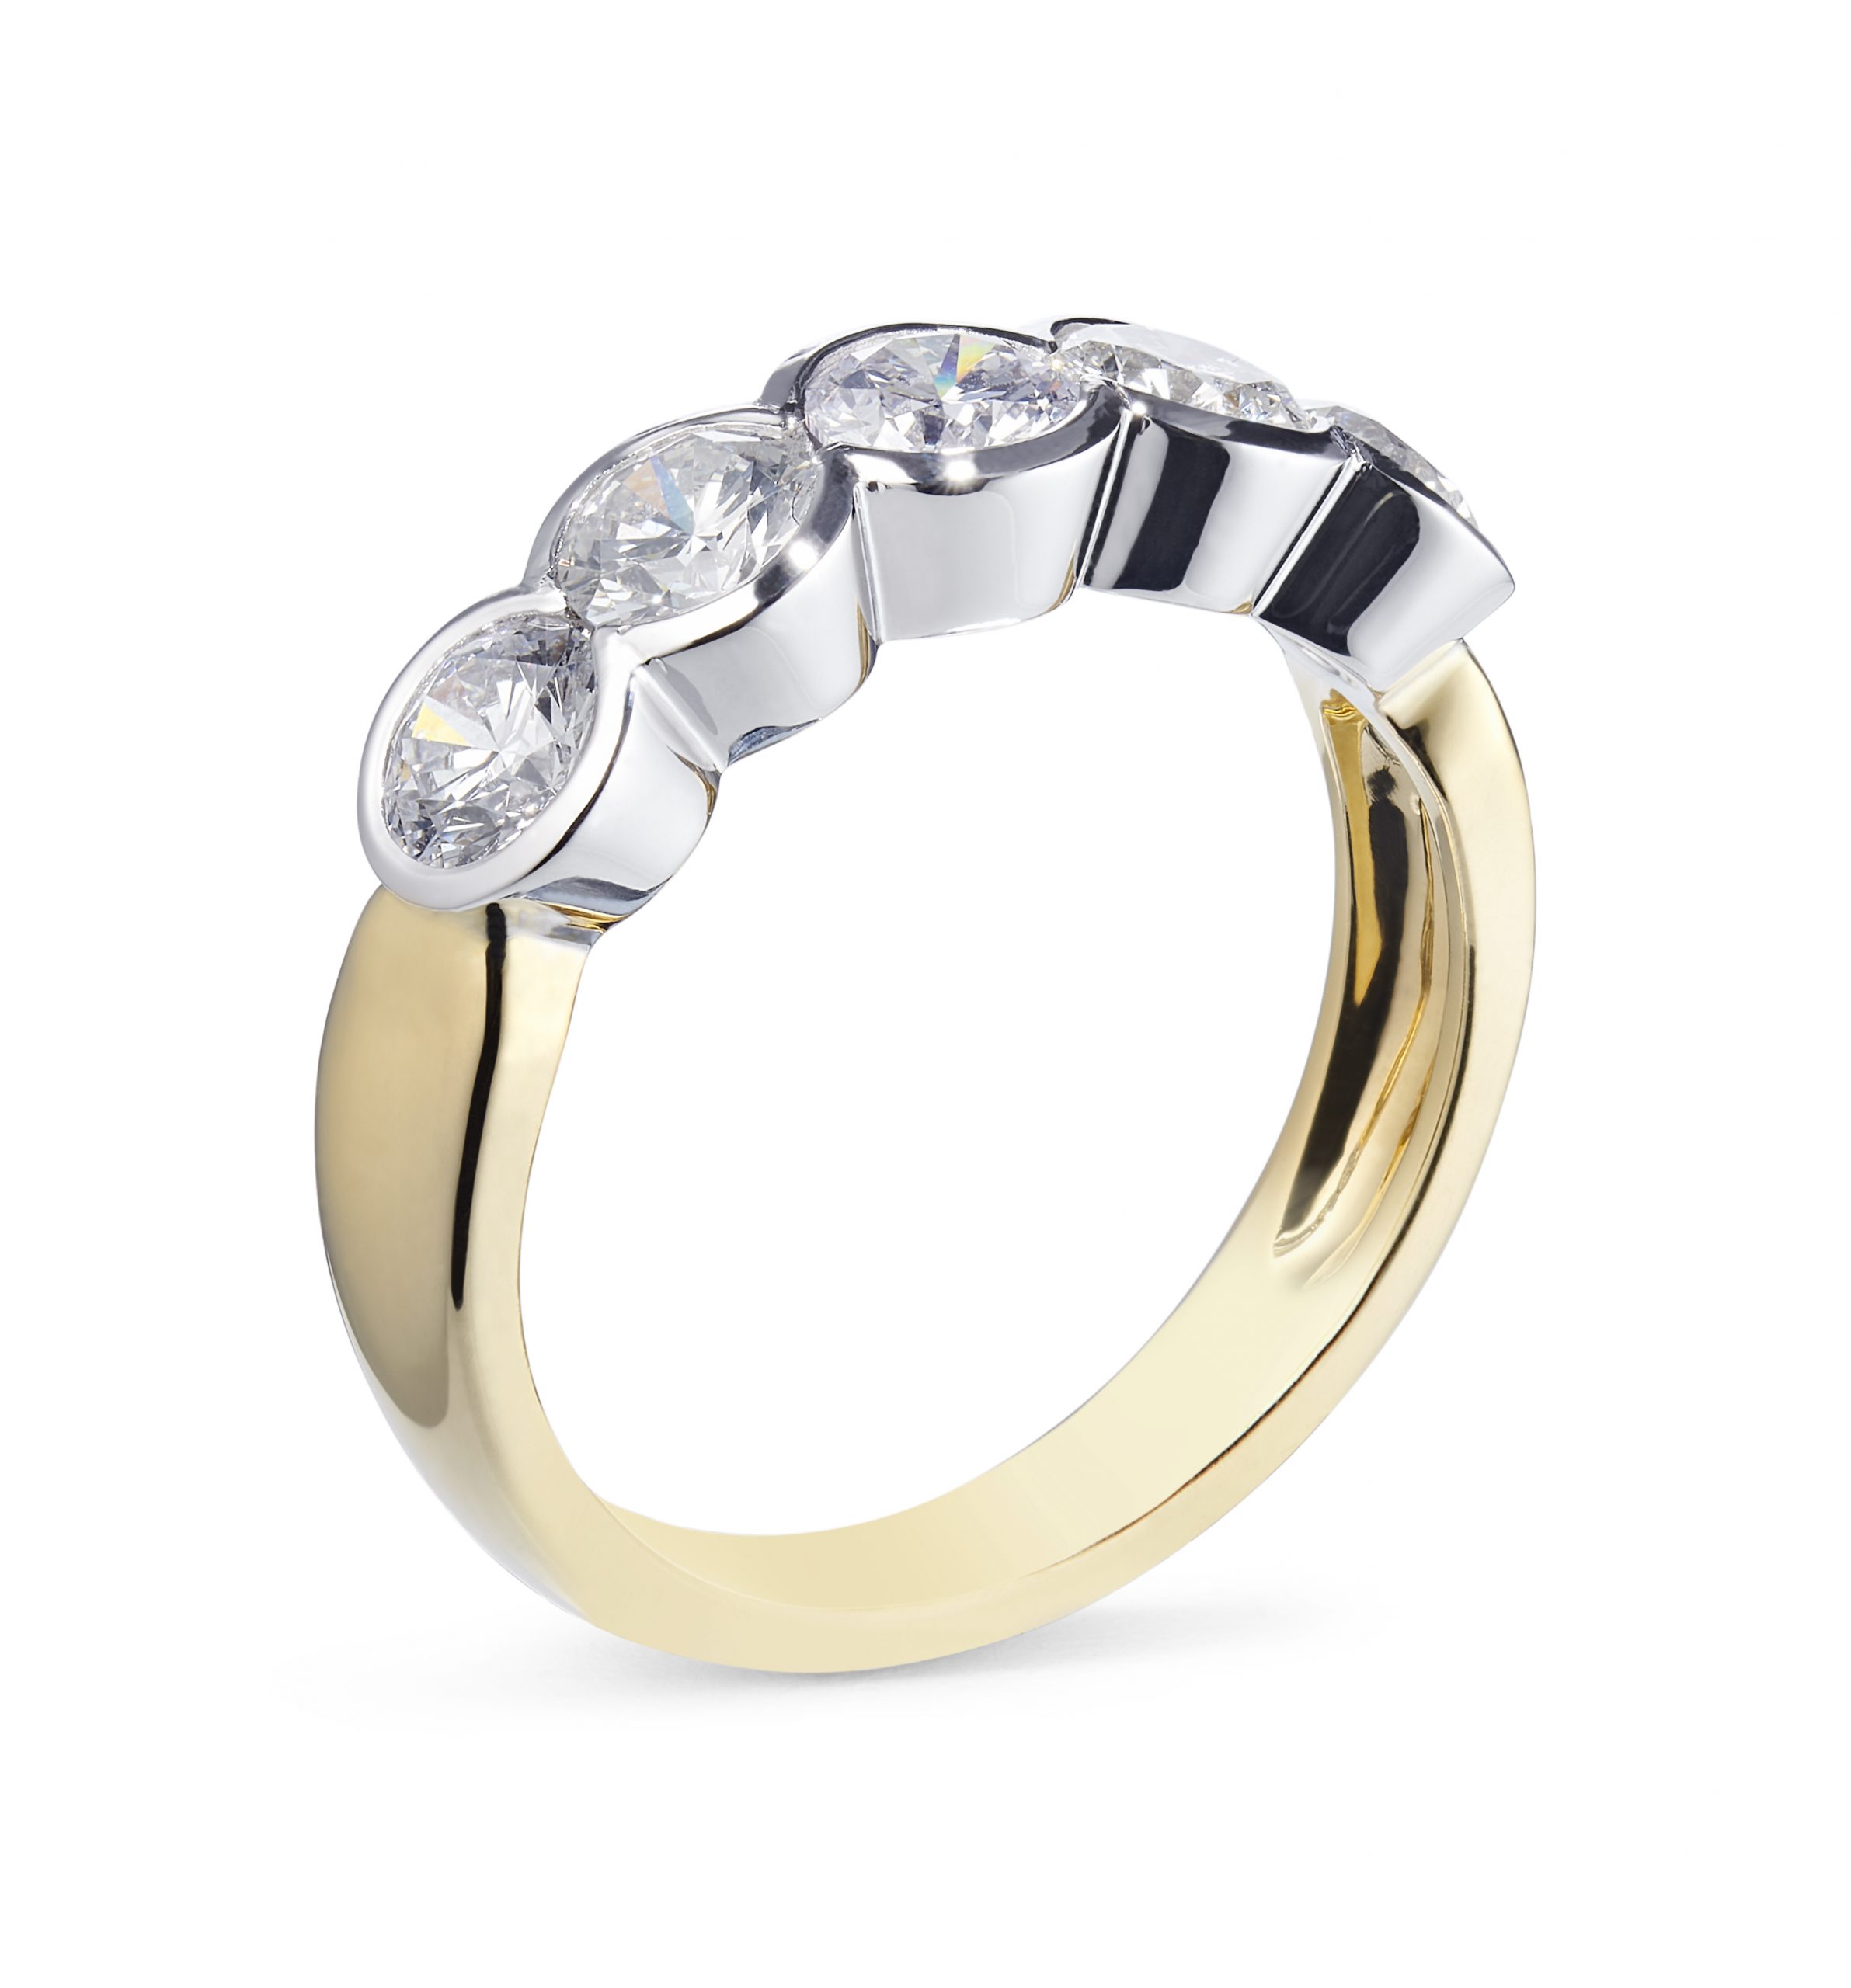 1.12ct 18ct Yellow and White Gold 5 Stone Rub-over Ring